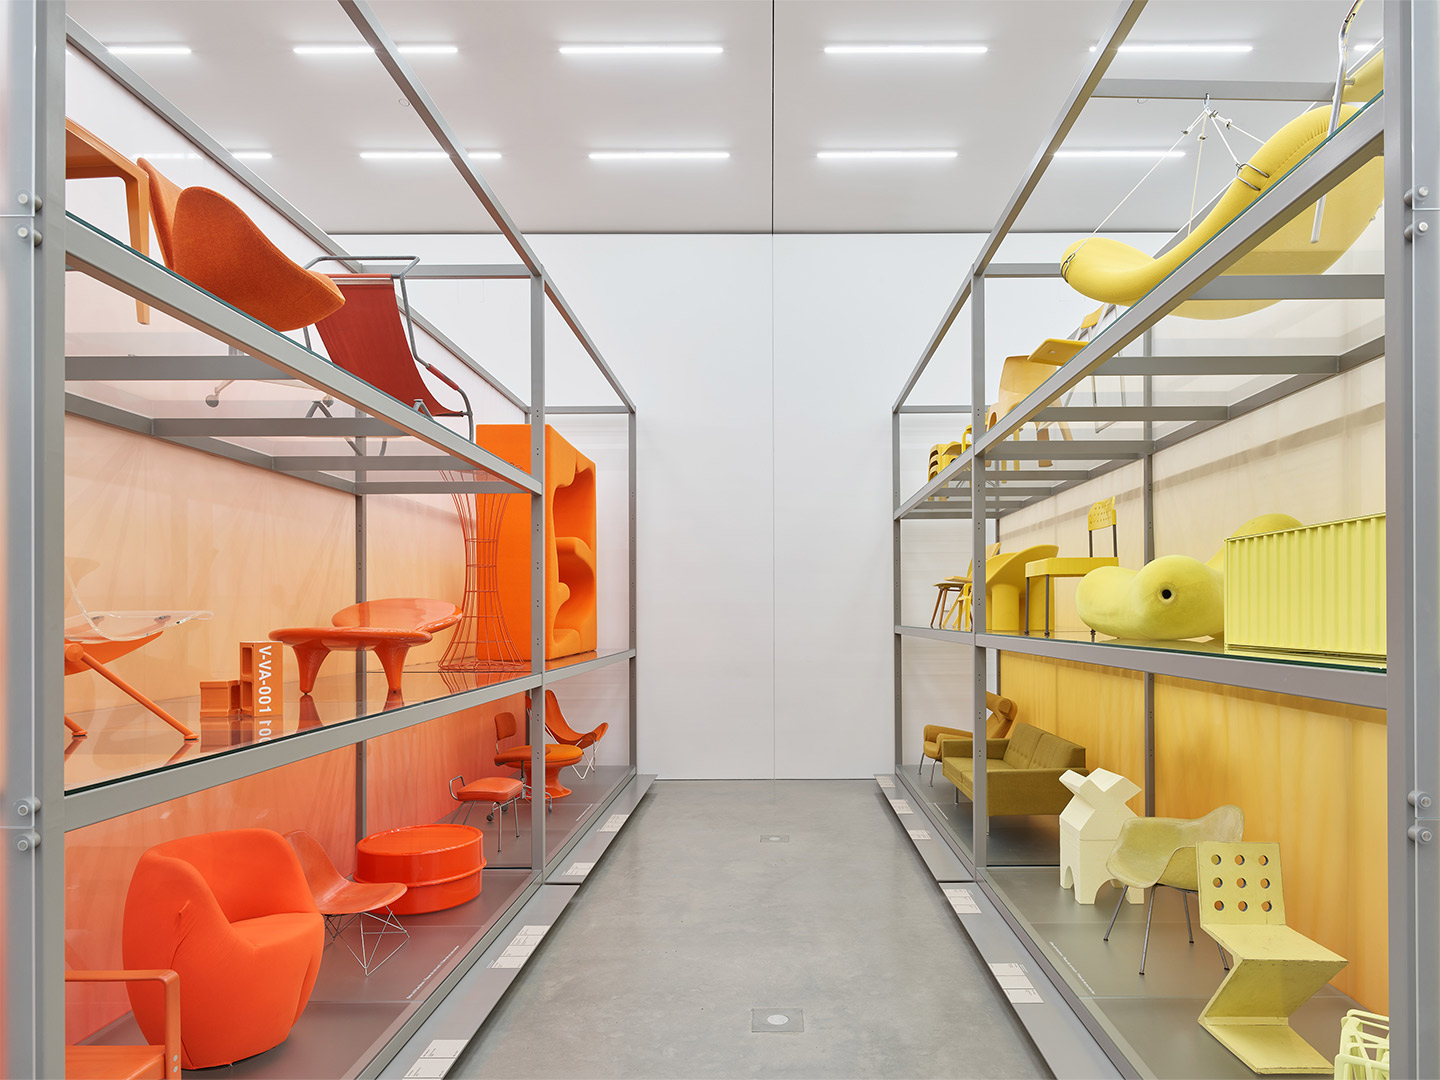 Sabine Marcelis sorts Vitra’s archives by colour at the Schaudepot in Germany